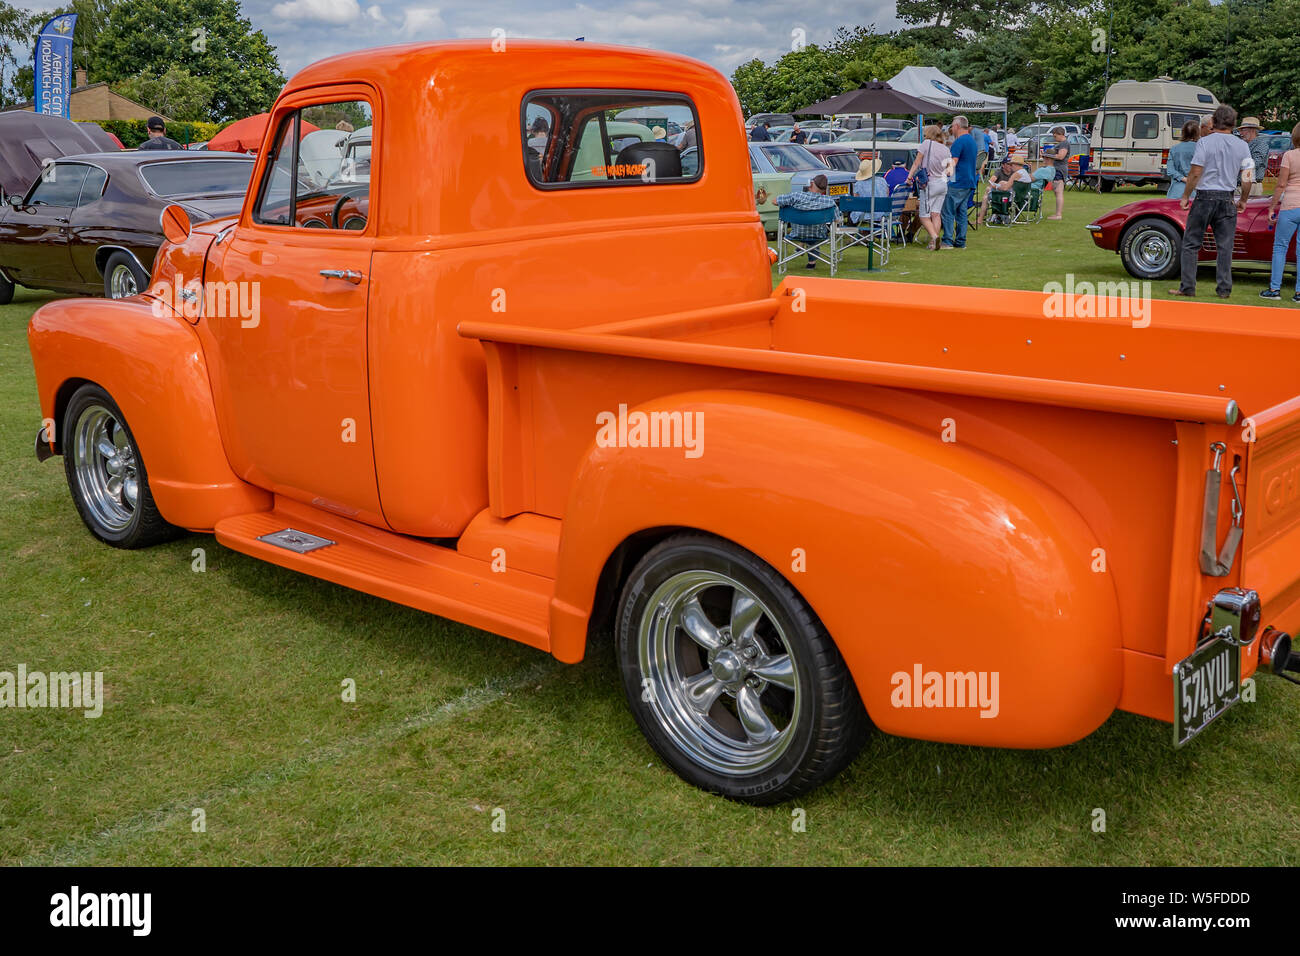 Classic Chevrolet pickup truck in bright orange on display at the annual classic car show in Wroxham, Norfolk, UK Stock Photo